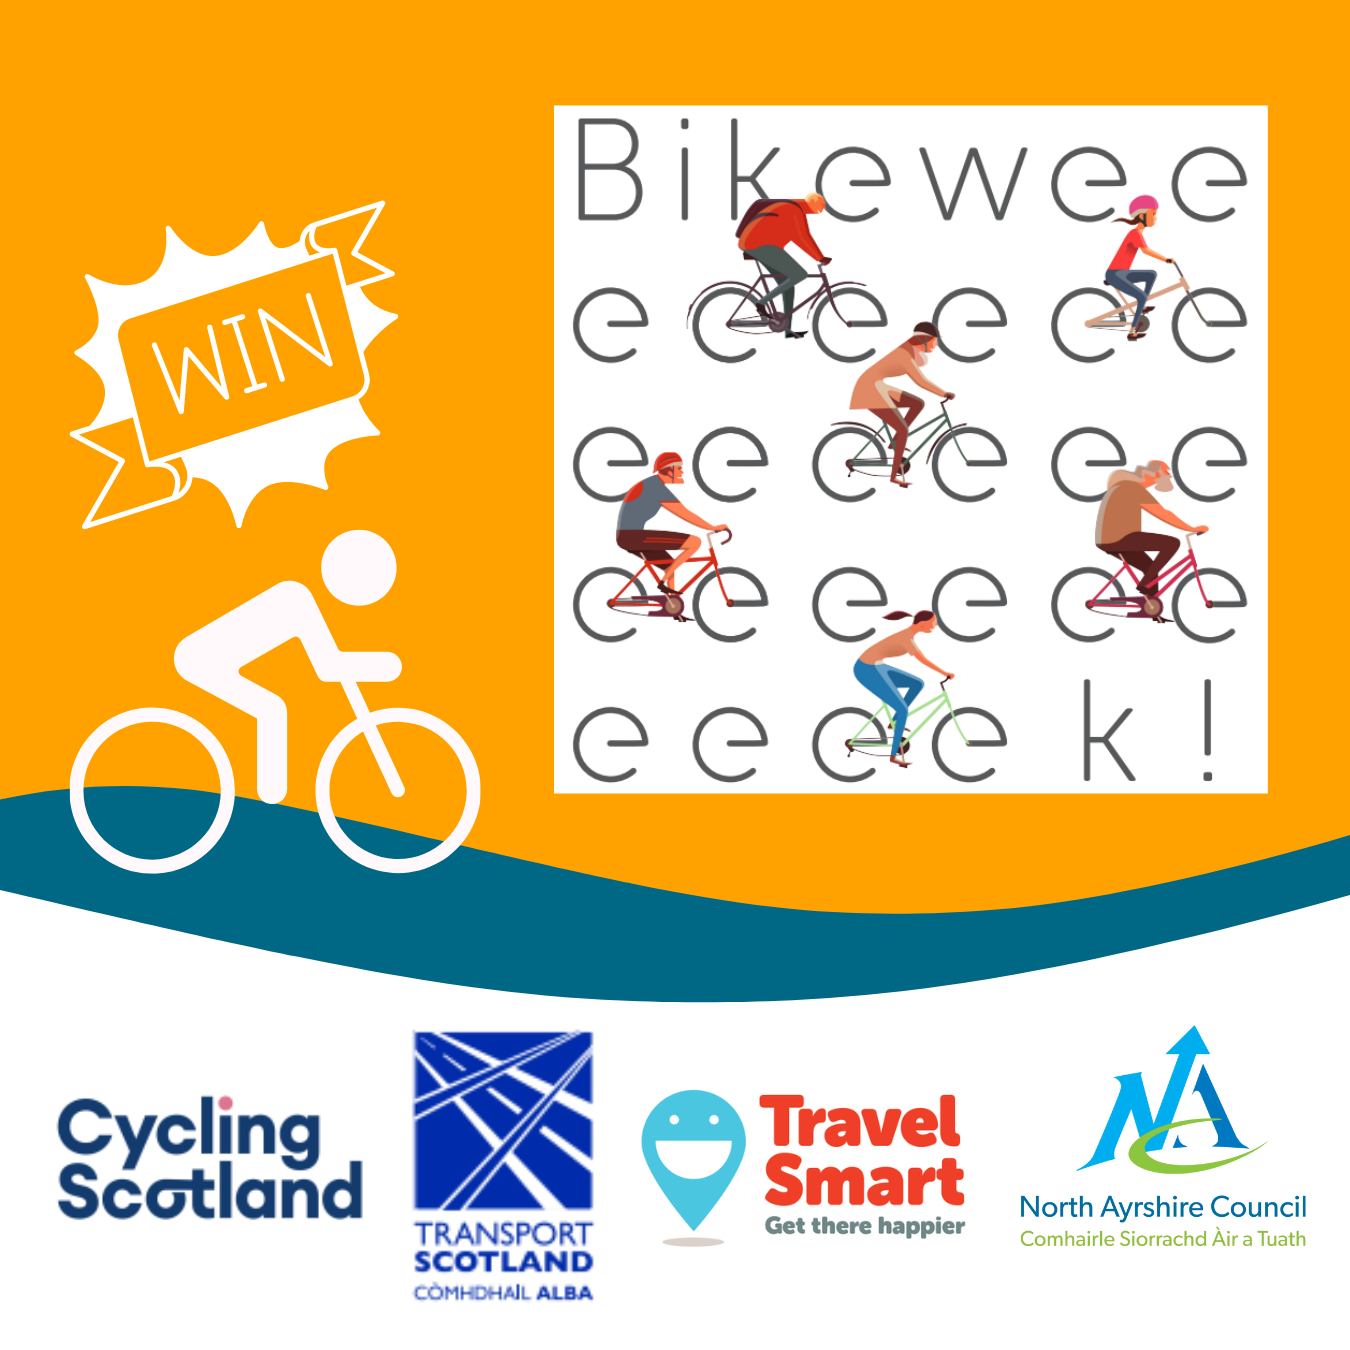 Bike Week logos and cyclists with win badge